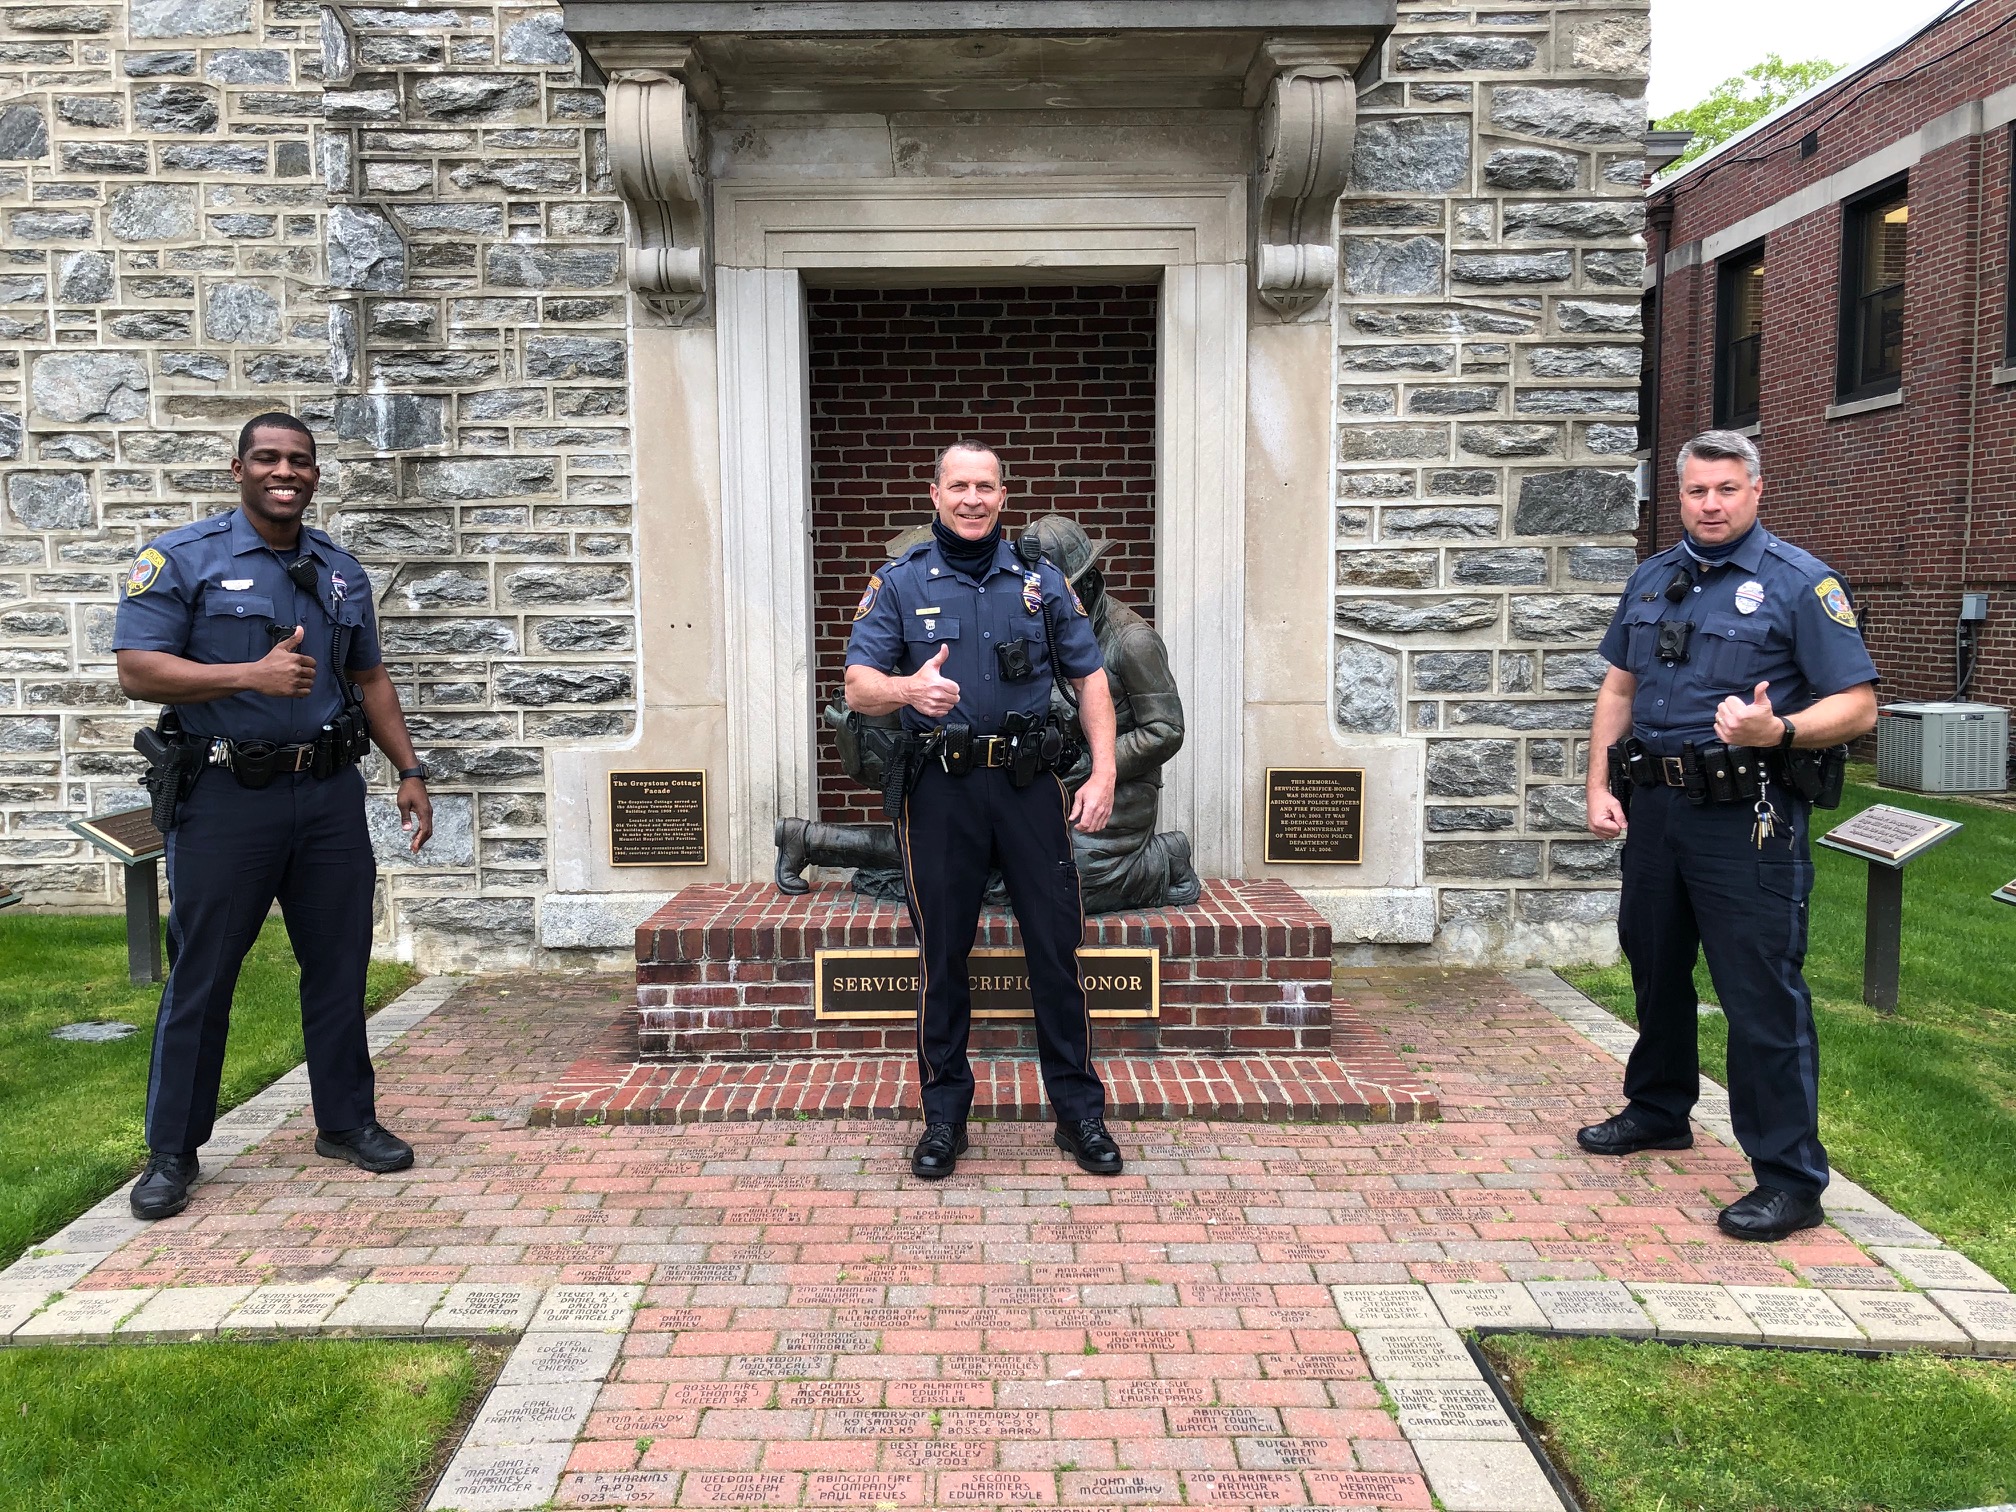 Abington Township Police Department Announces America Strong and United